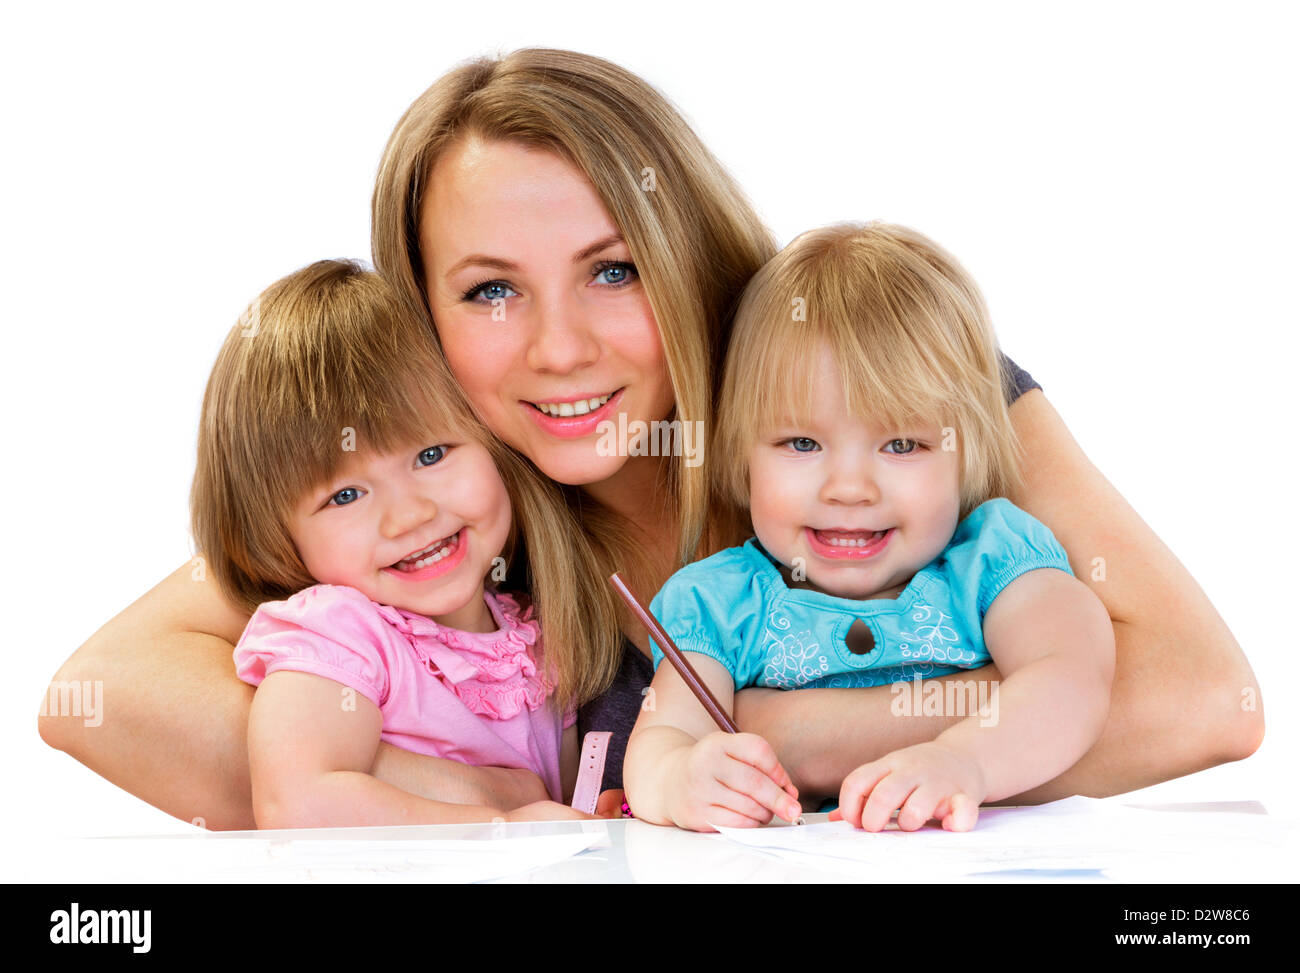 Mom and daughters, happy family, isolated on white background Stock Photo